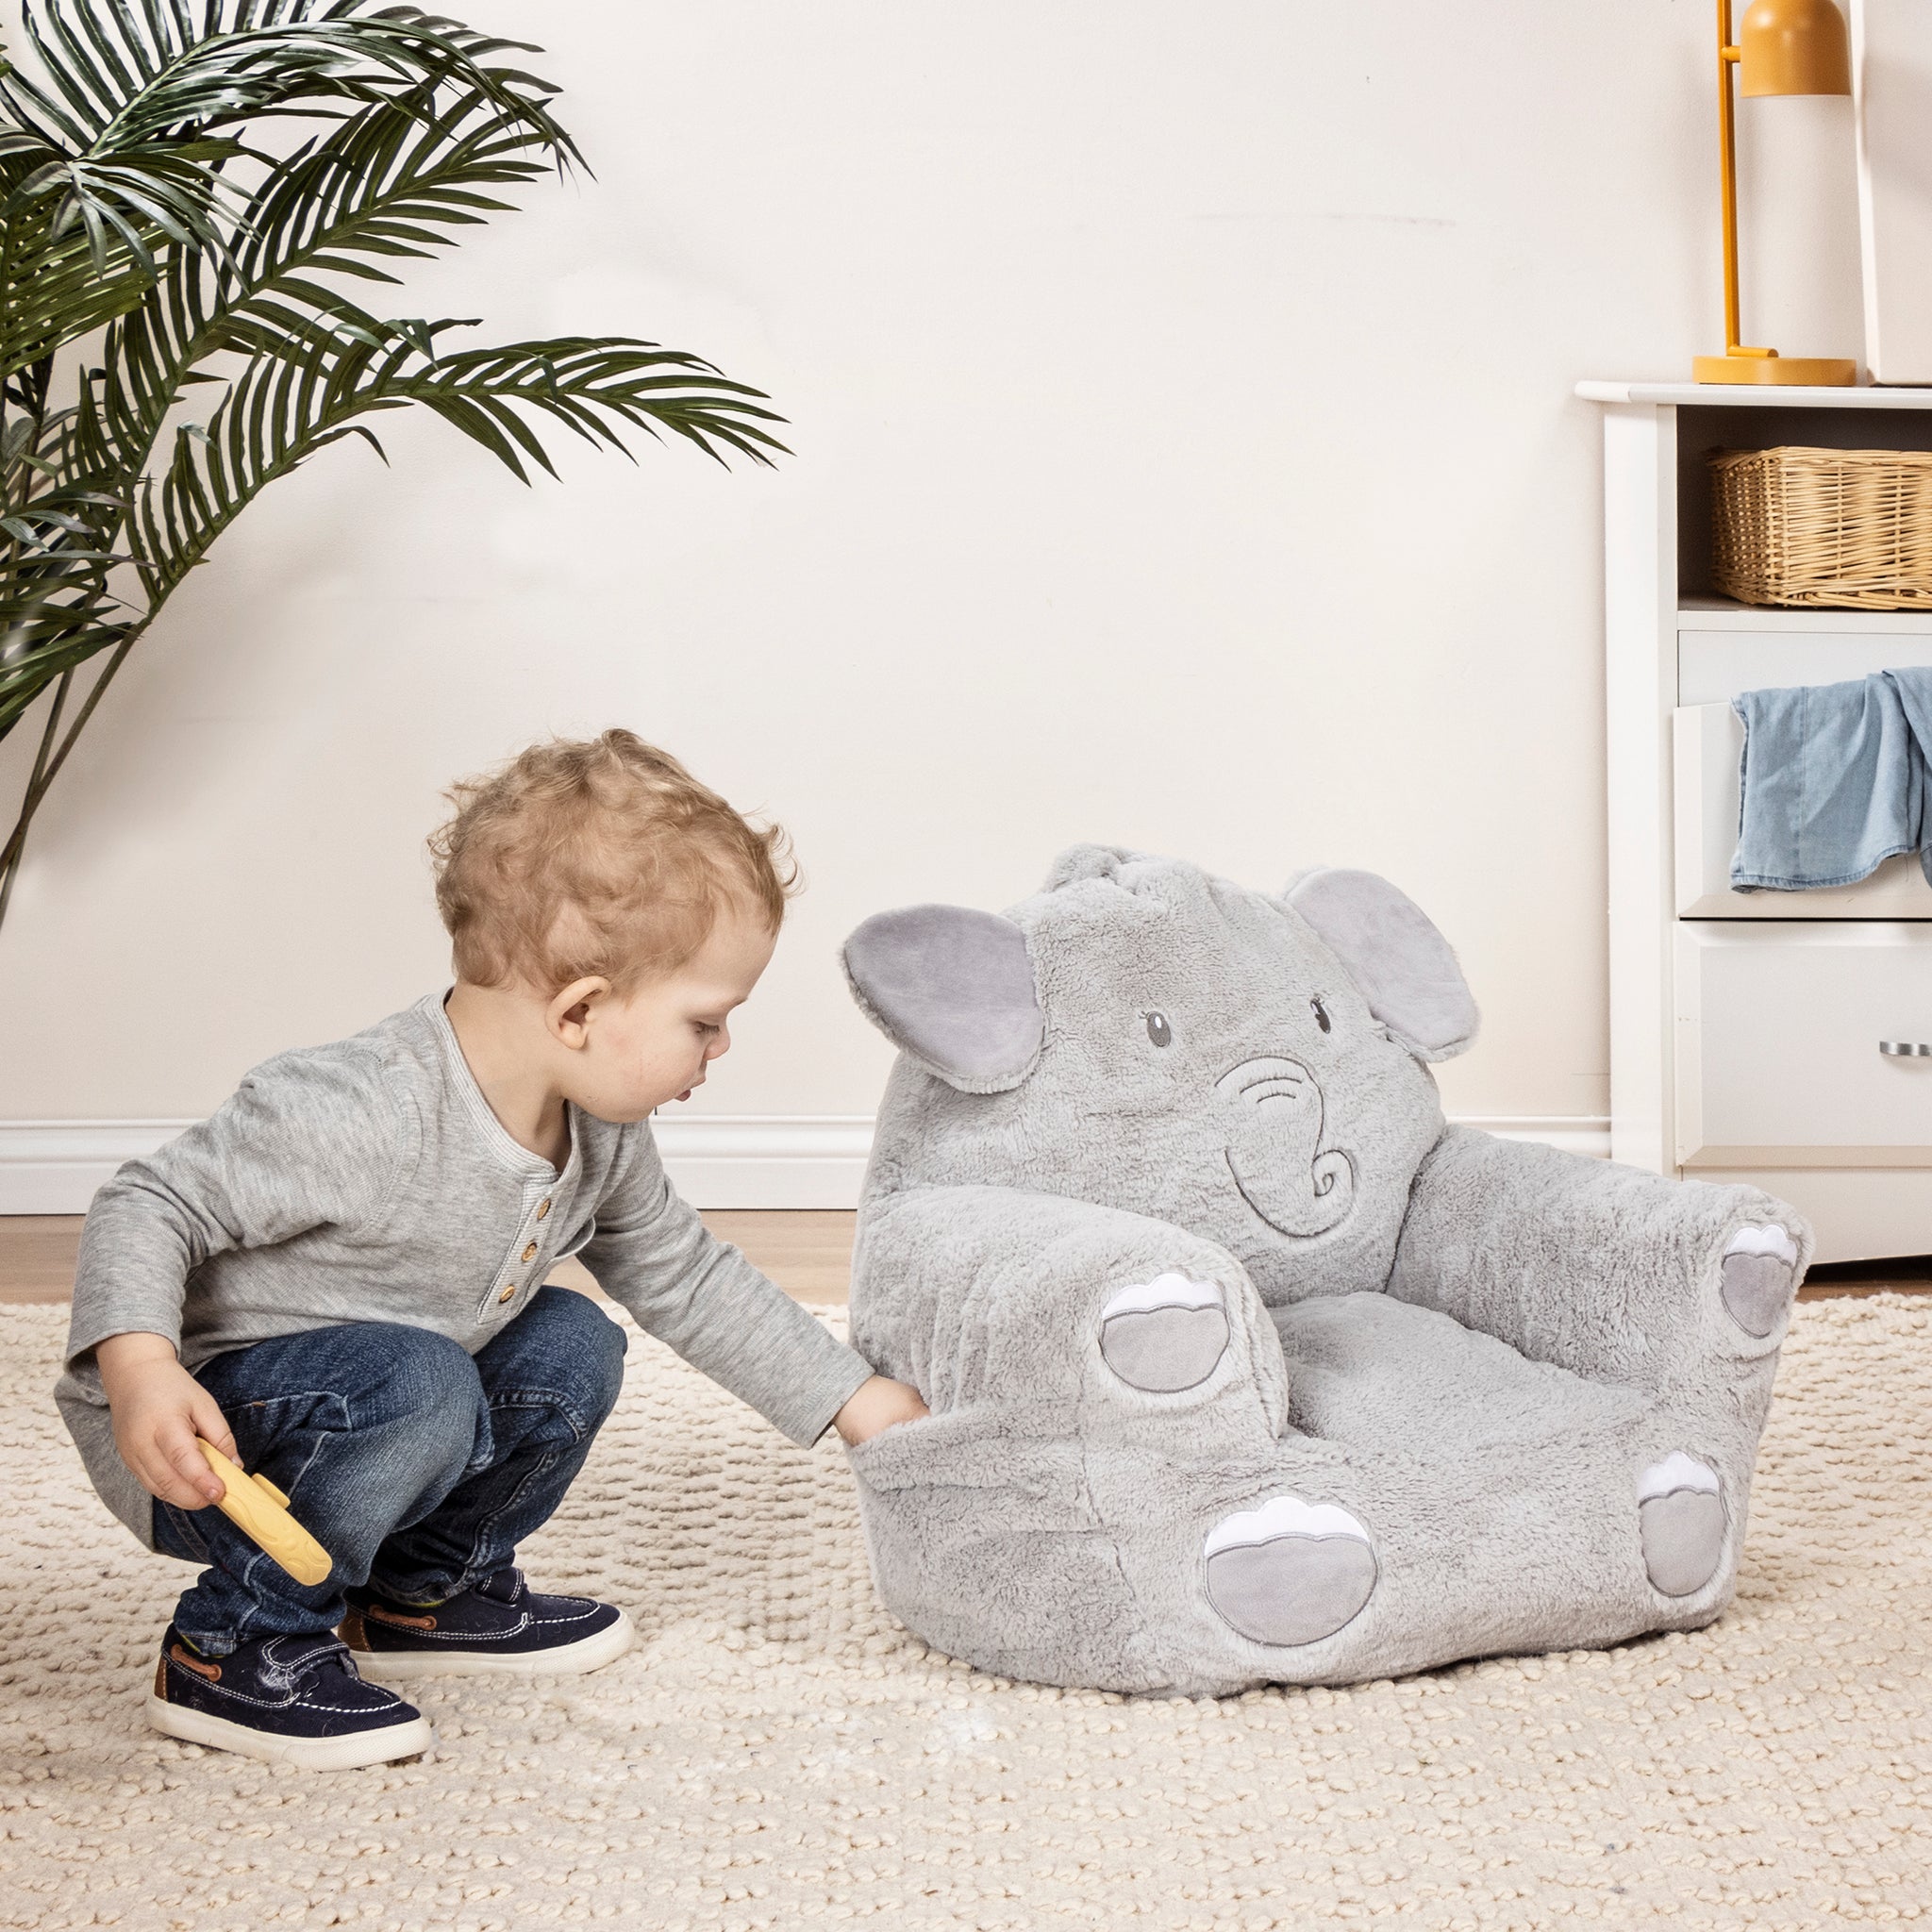 Toddler Plush Elephant Character Chair by Cuddo Buddies